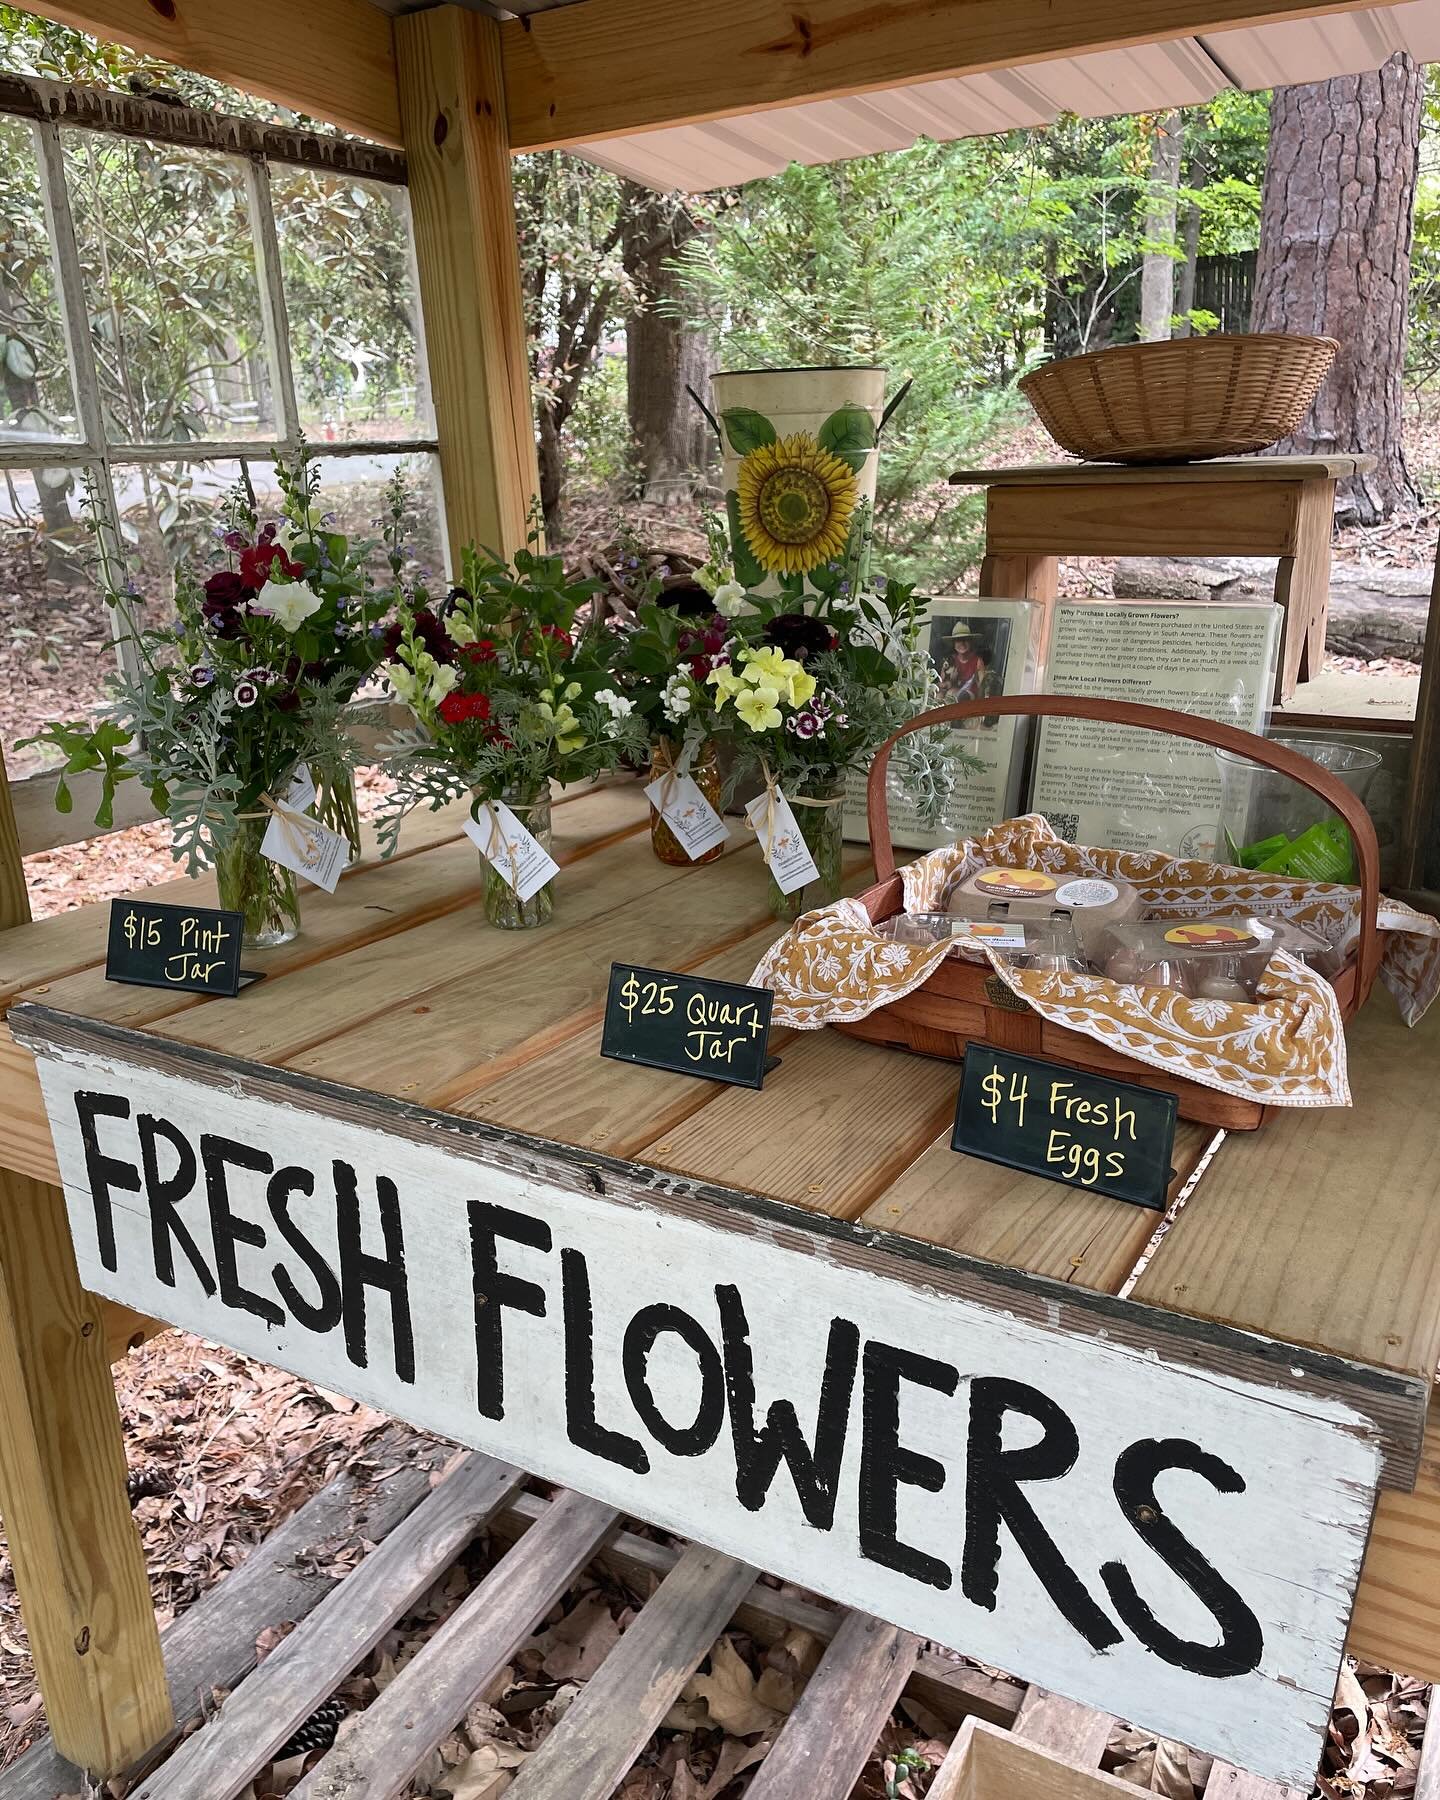 Flower Stand open today. Locally grown flowers and herbs and fresh eggs. Please stop by! I&rsquo;ll be adding to it throughout the day. Thank you for supporting local farmers! #elizabethsgarden #flowerstand #flowerfarmer #camdensc #camdenscflowers